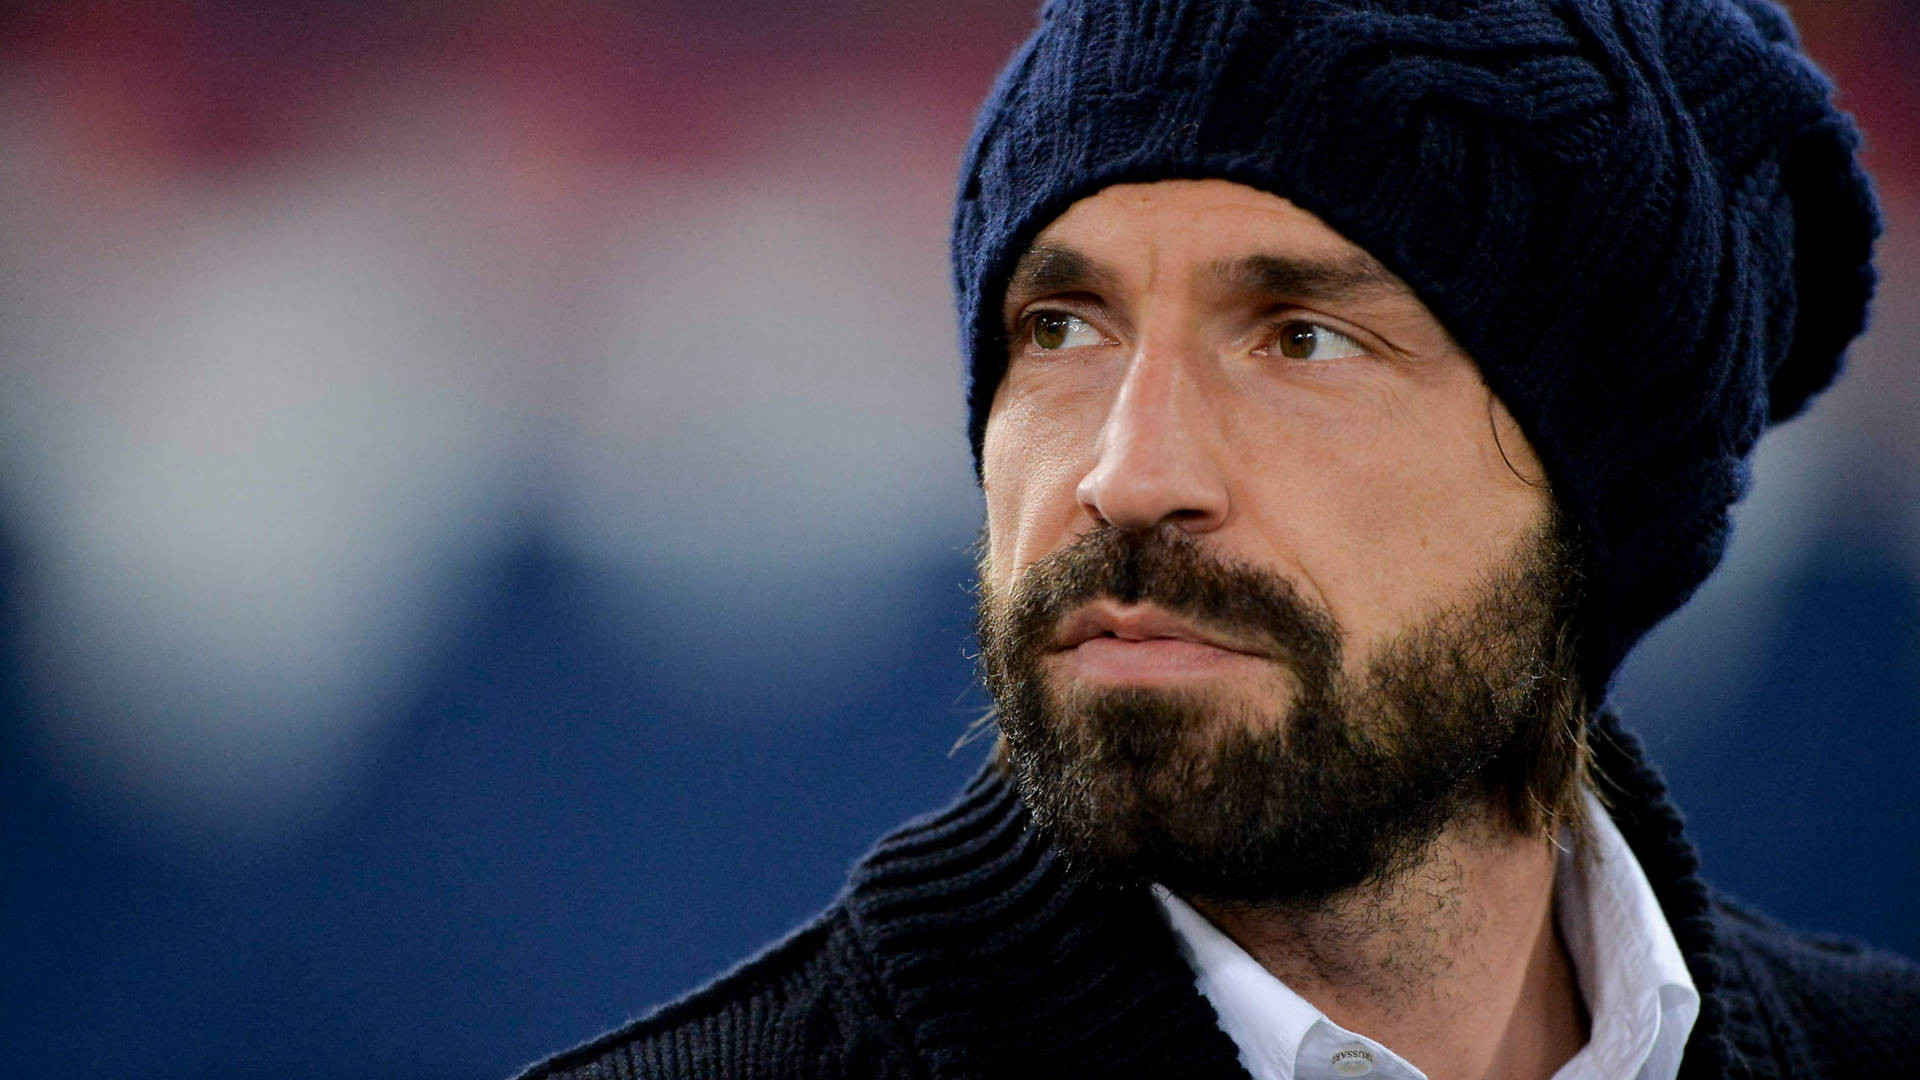 Andrea Pirlo in a Stylish Beanie Hat Wallpaper